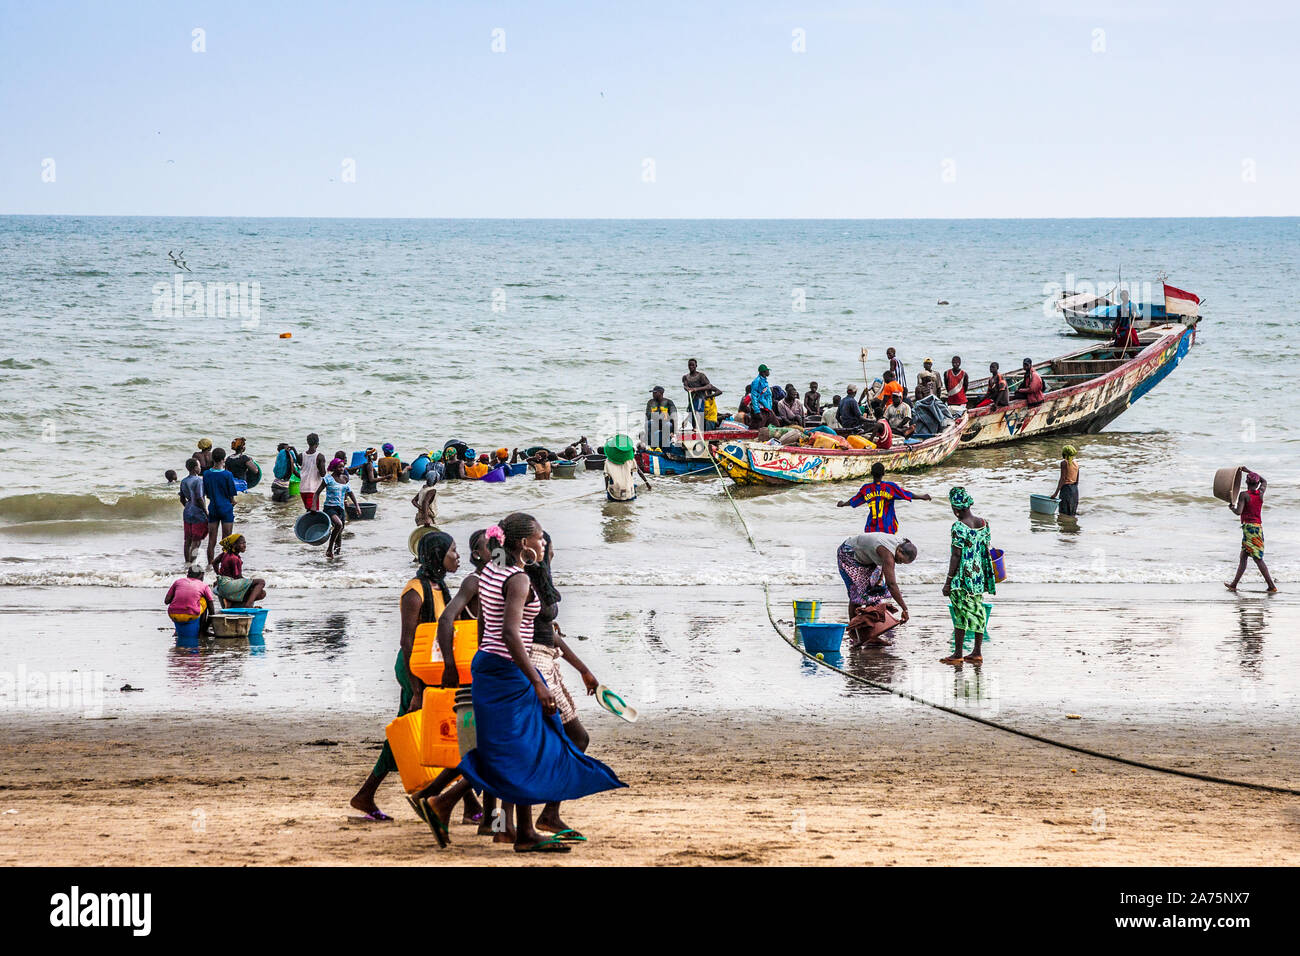 Women wait with buckets for the men to unload their catch in Tanji Fishing Village in The Gambia. Stock Photo